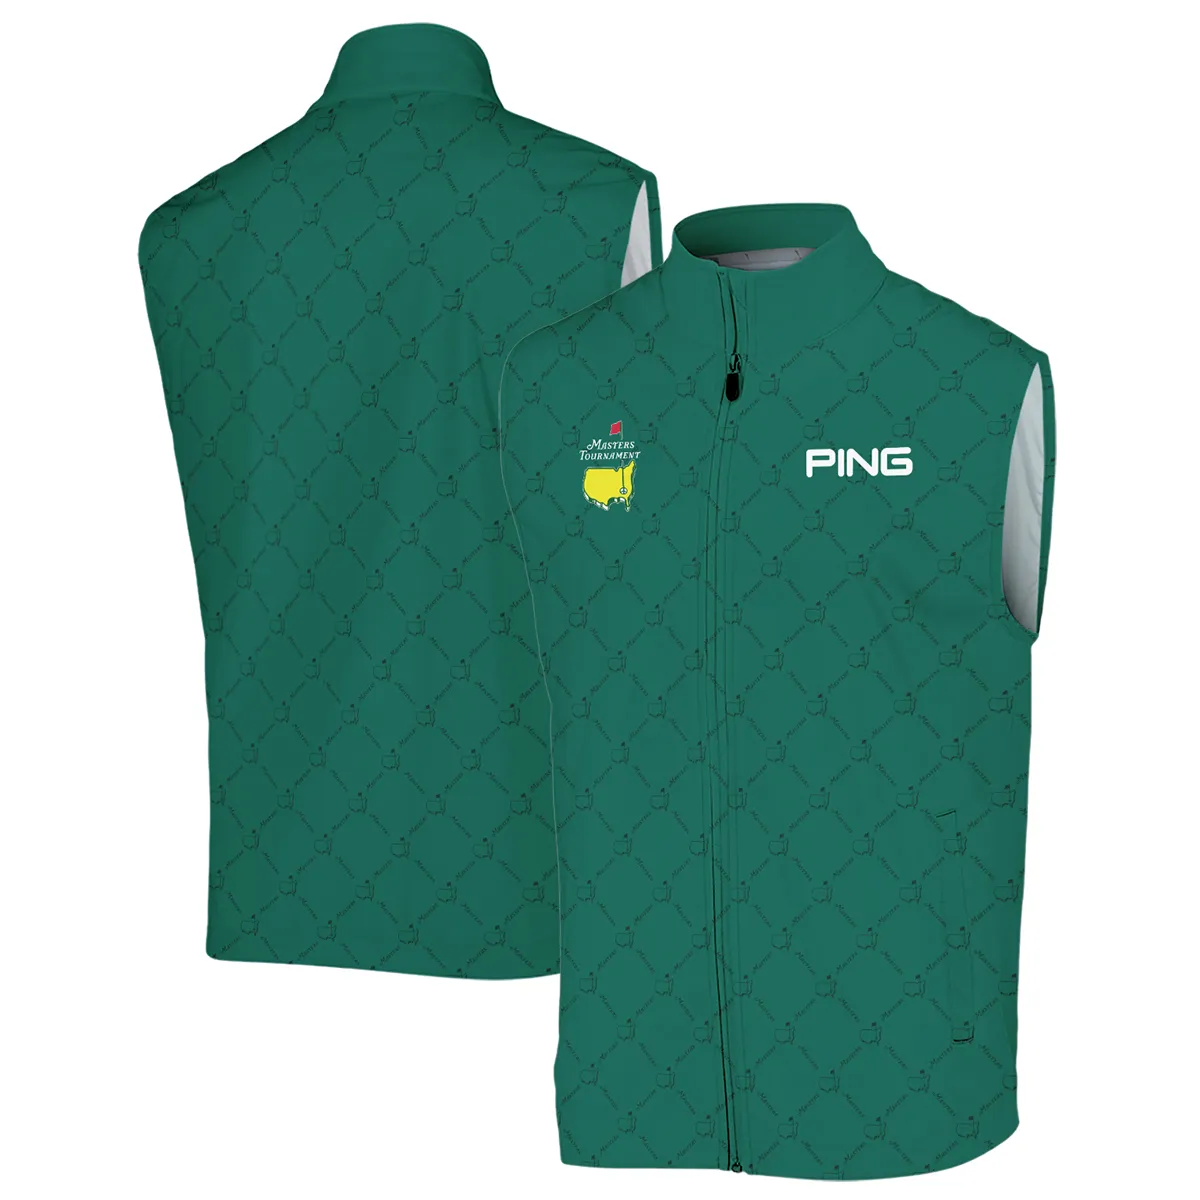 Golf Sport Pattern Color Green Mix Black Masters Tournament Ping Quarter-Zip Jacket Style Classic